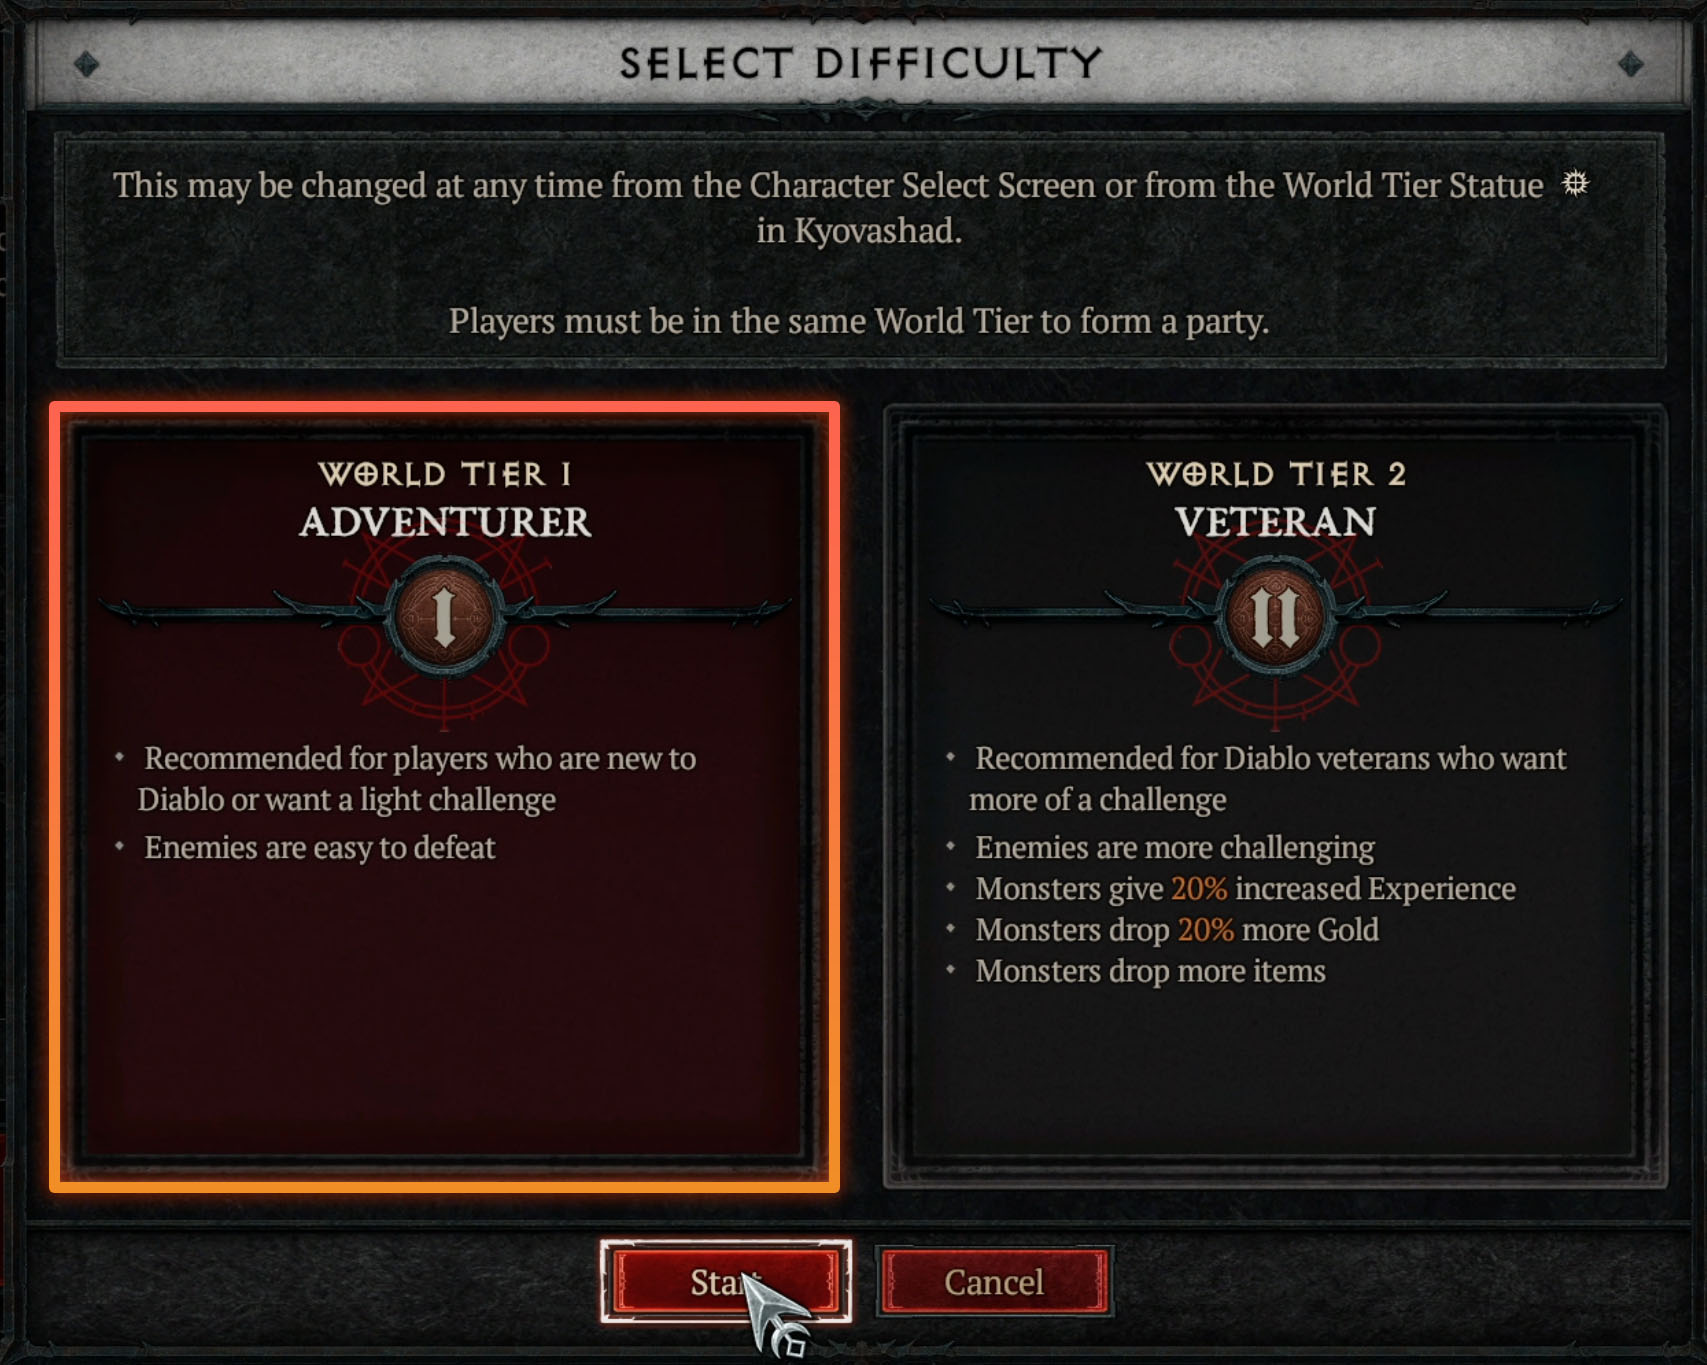 Diablo IV: Game Difficulty - World Tier 1